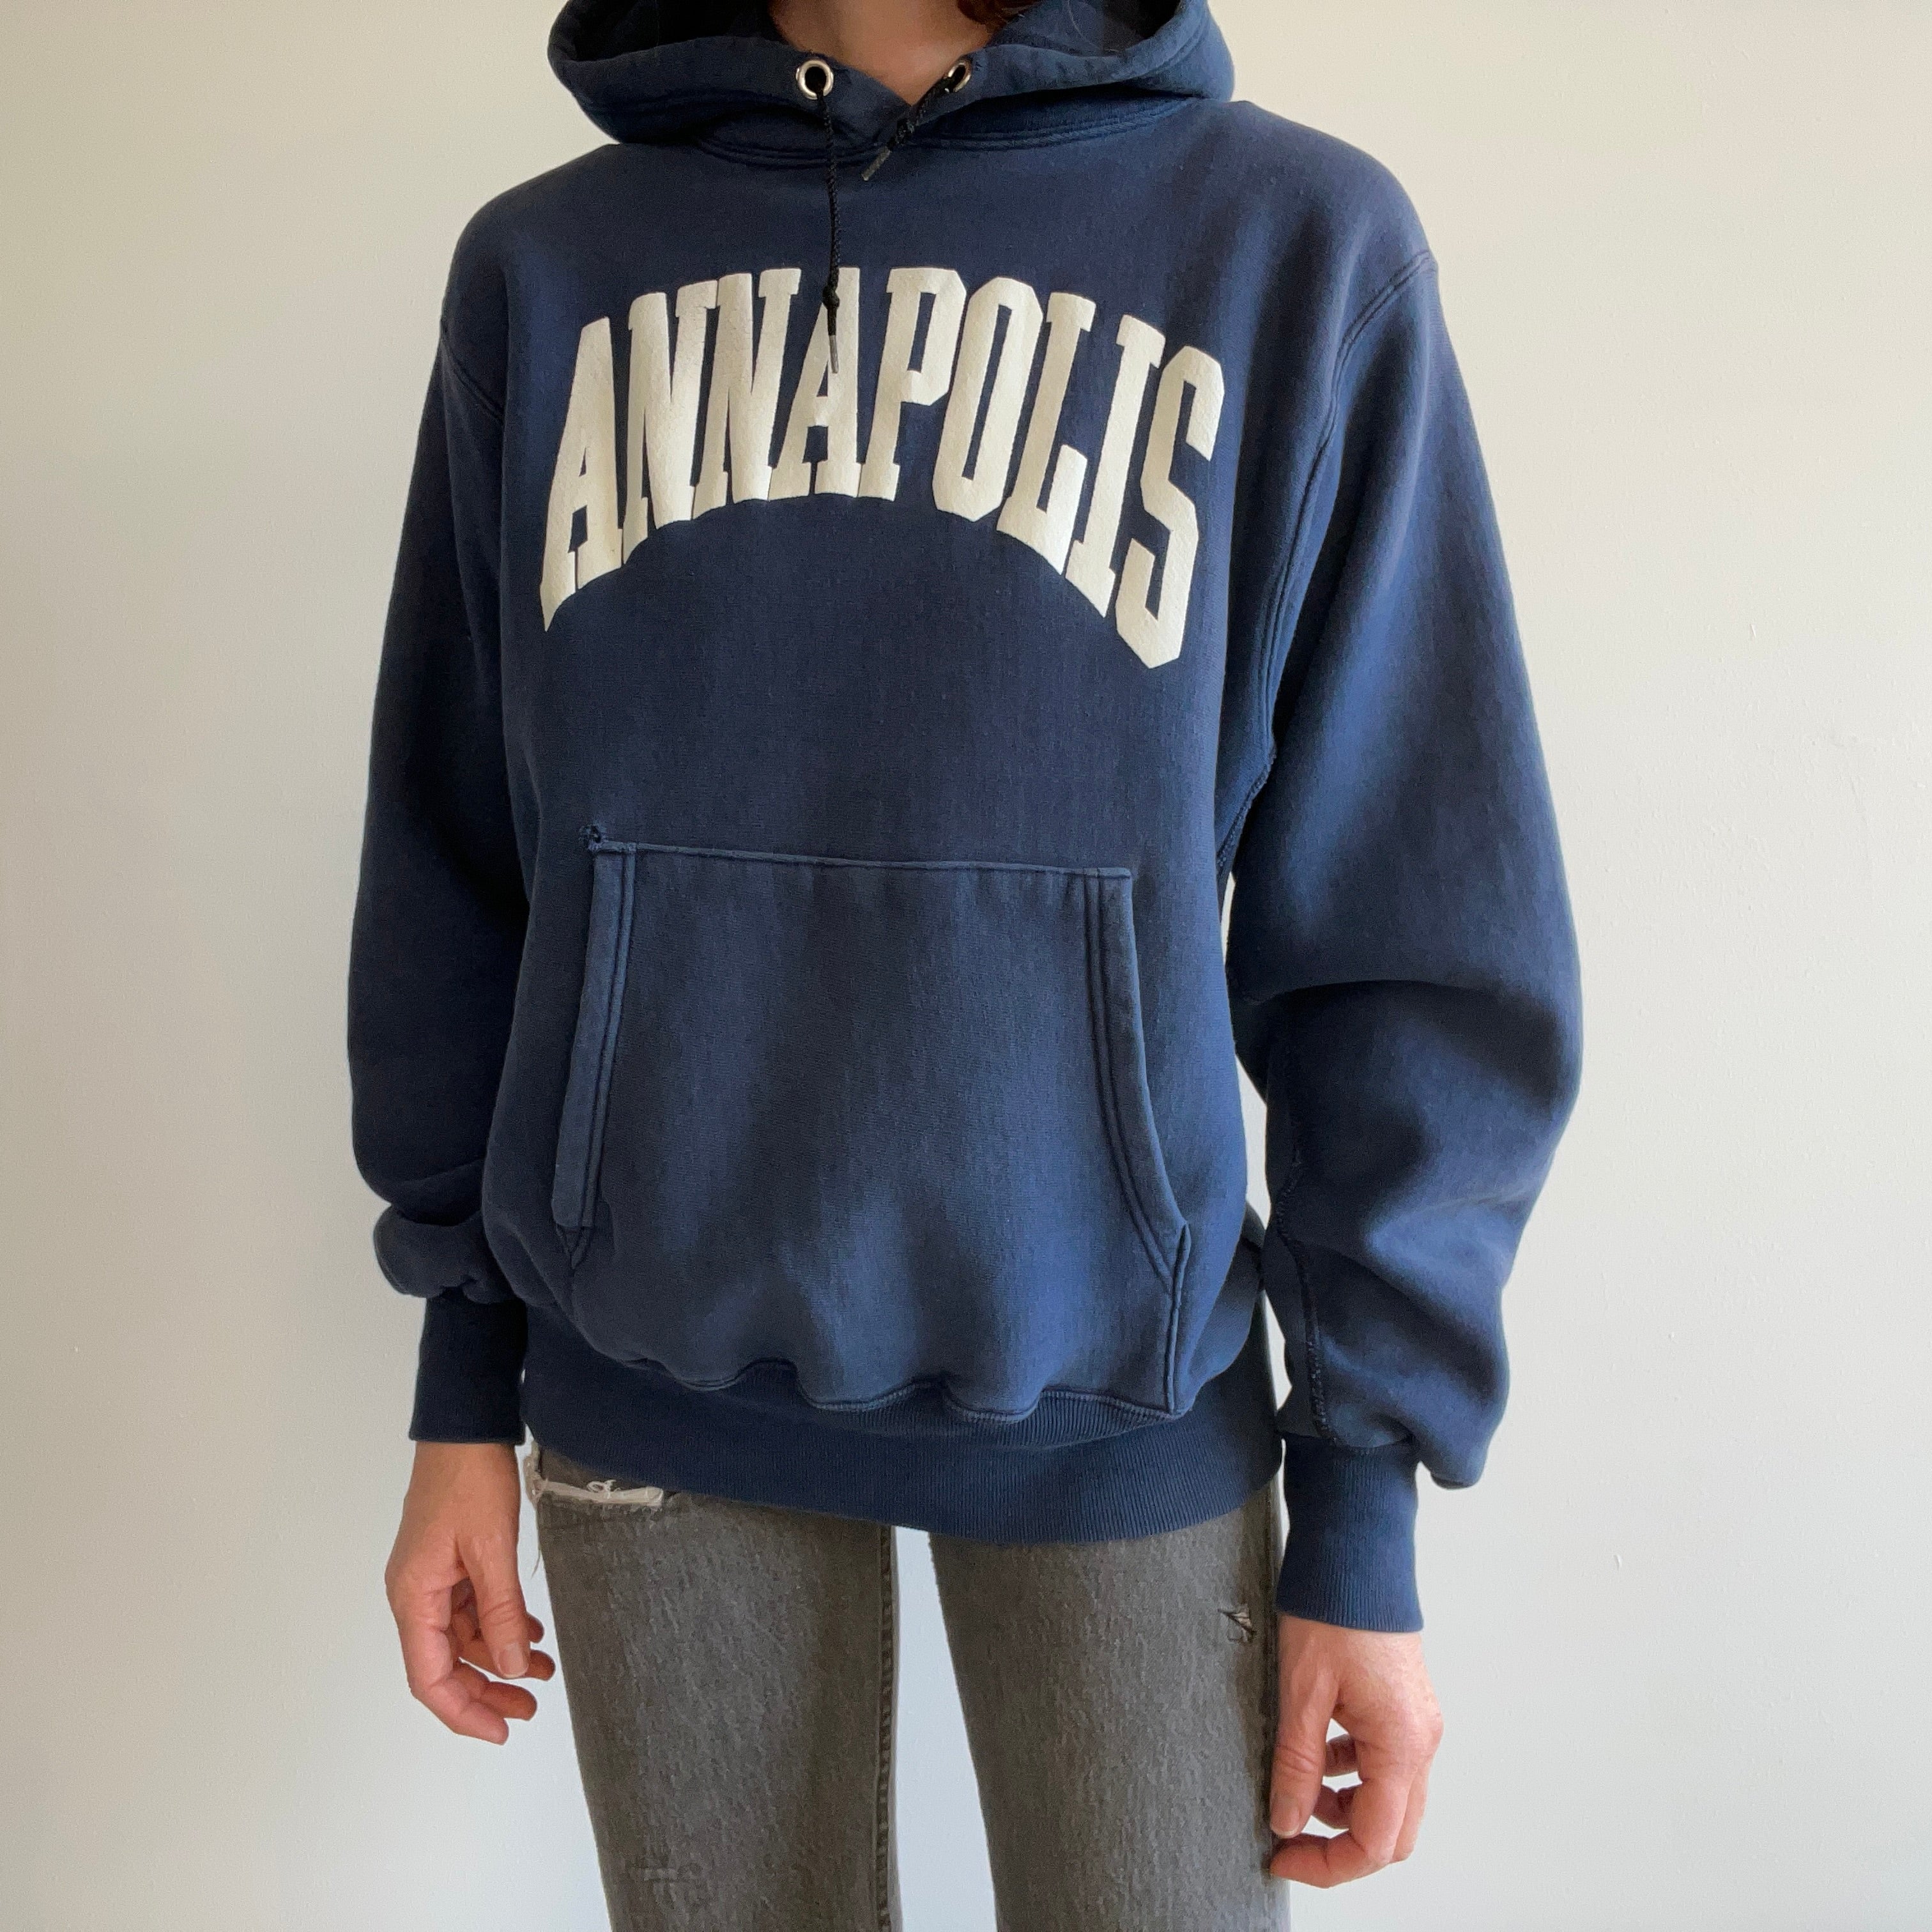 1980s Annapolis Naval Academy Reverse Weaver Soft and Slouchy Sun Faded  Hoodie - THIS IS GOLD